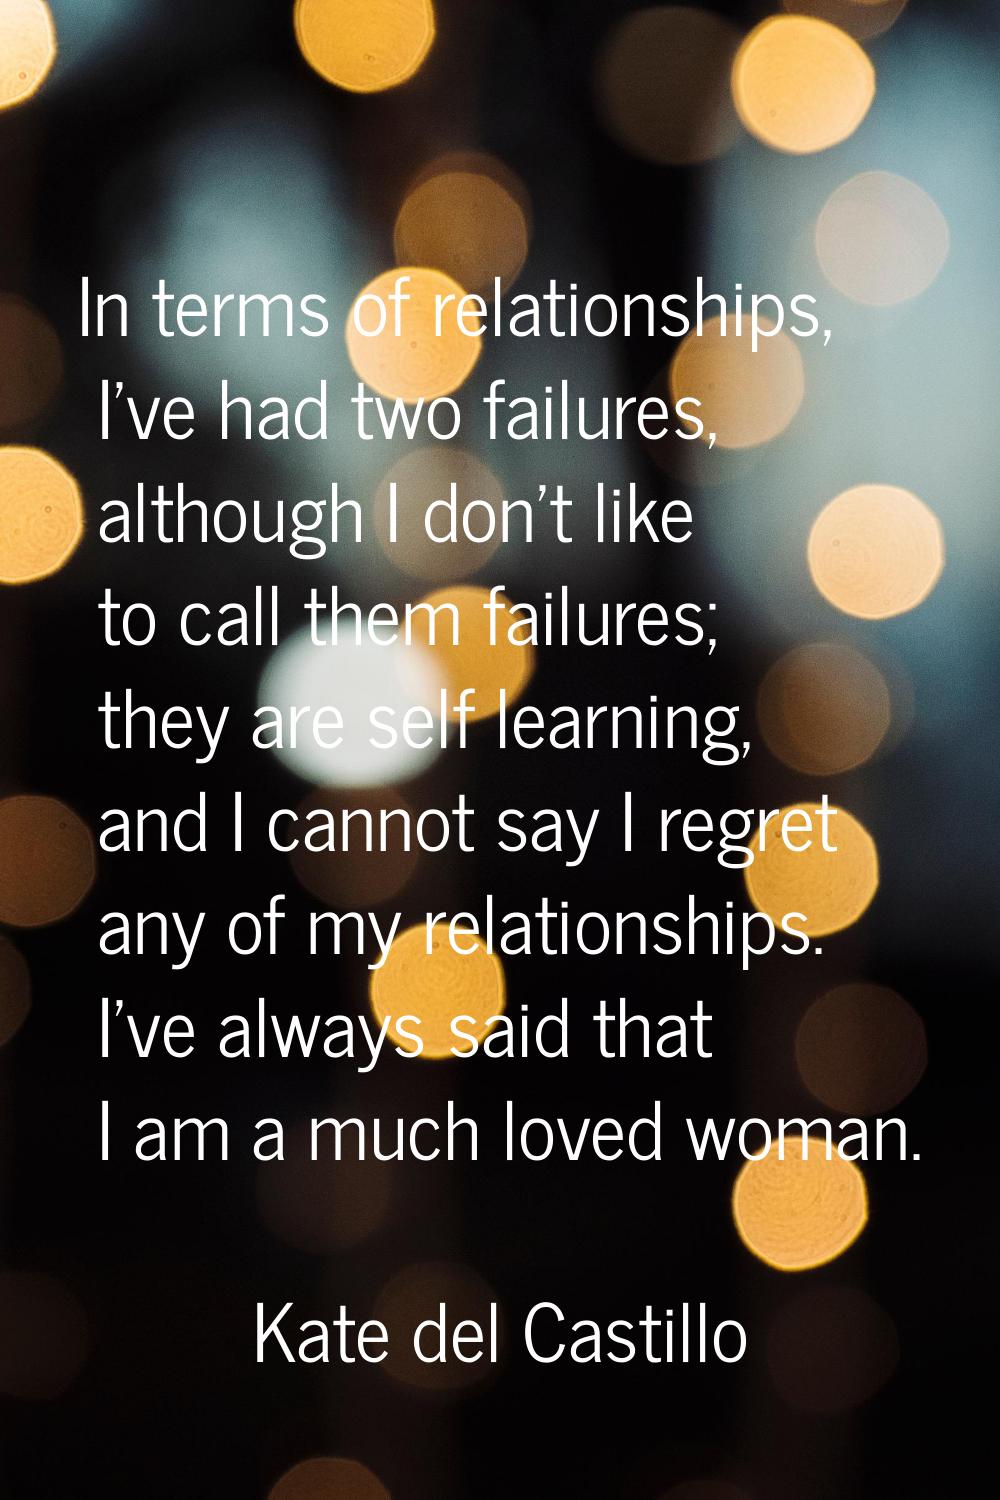 In terms of relationships, I've had two failures, although I don't like to call them failures; they